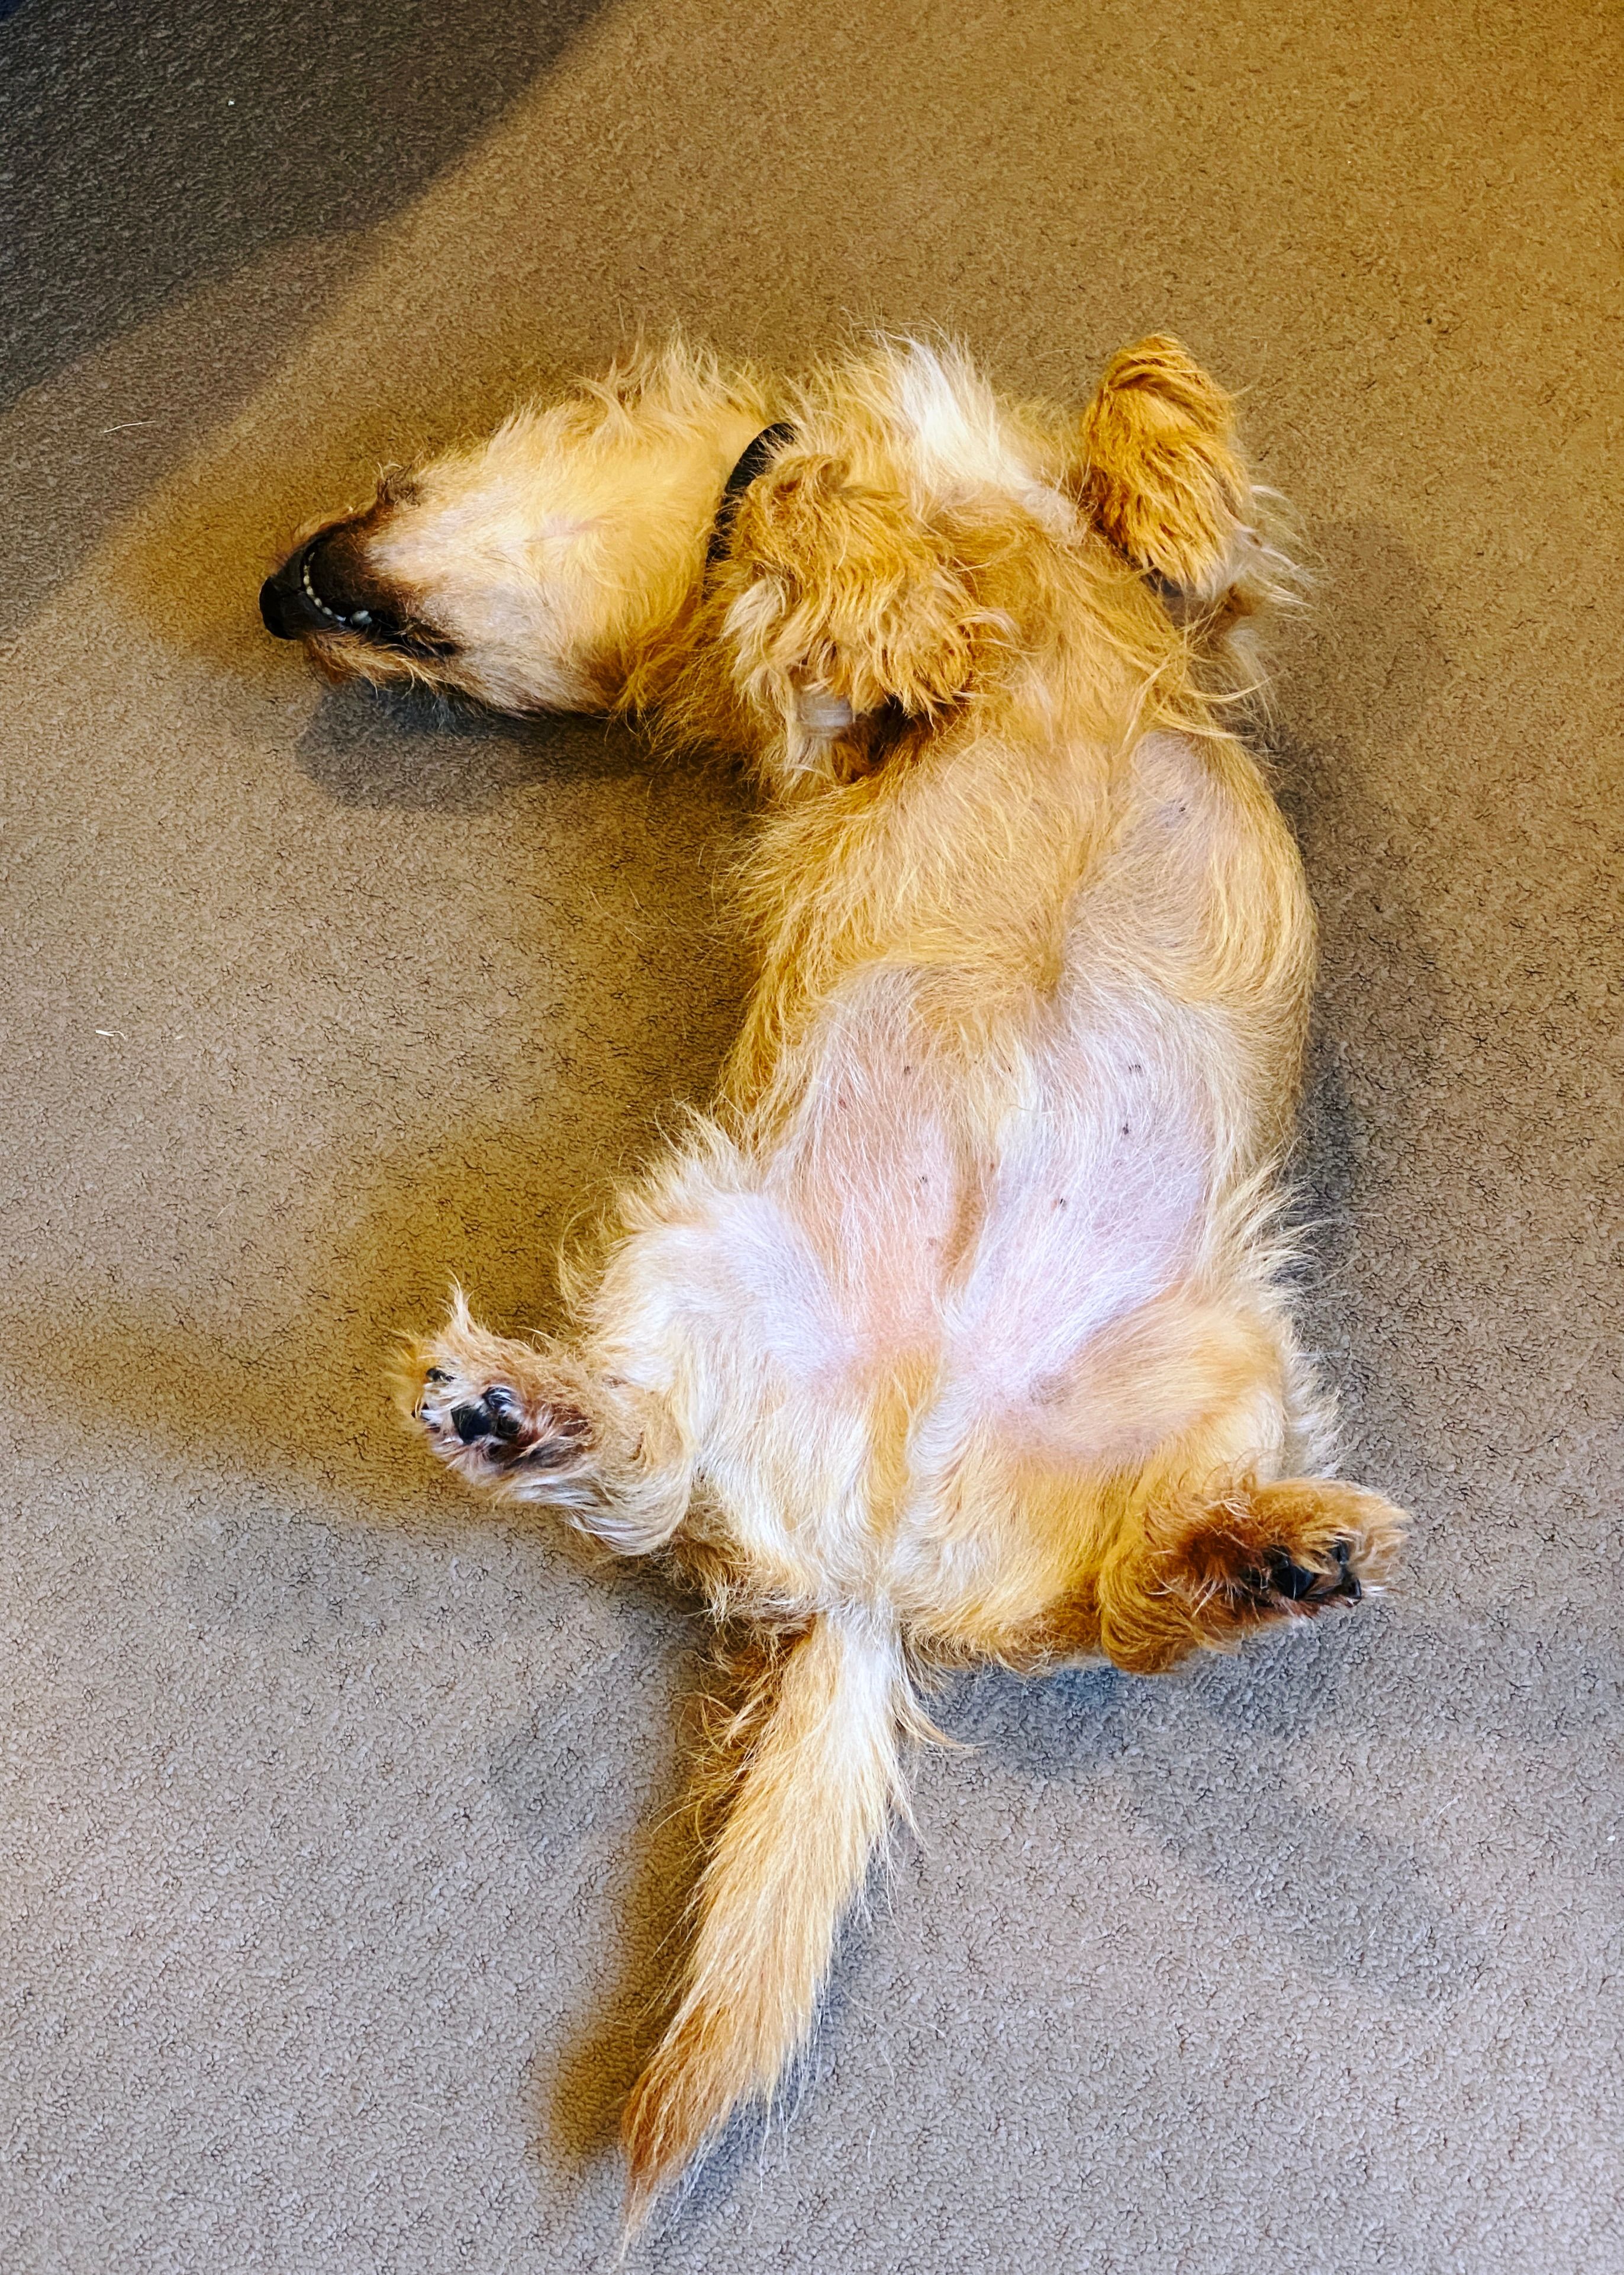 A photo of a small scruffy blonde dog lying completely upside-down fast asleep, his back legs are up in the air and his head is off to one side.